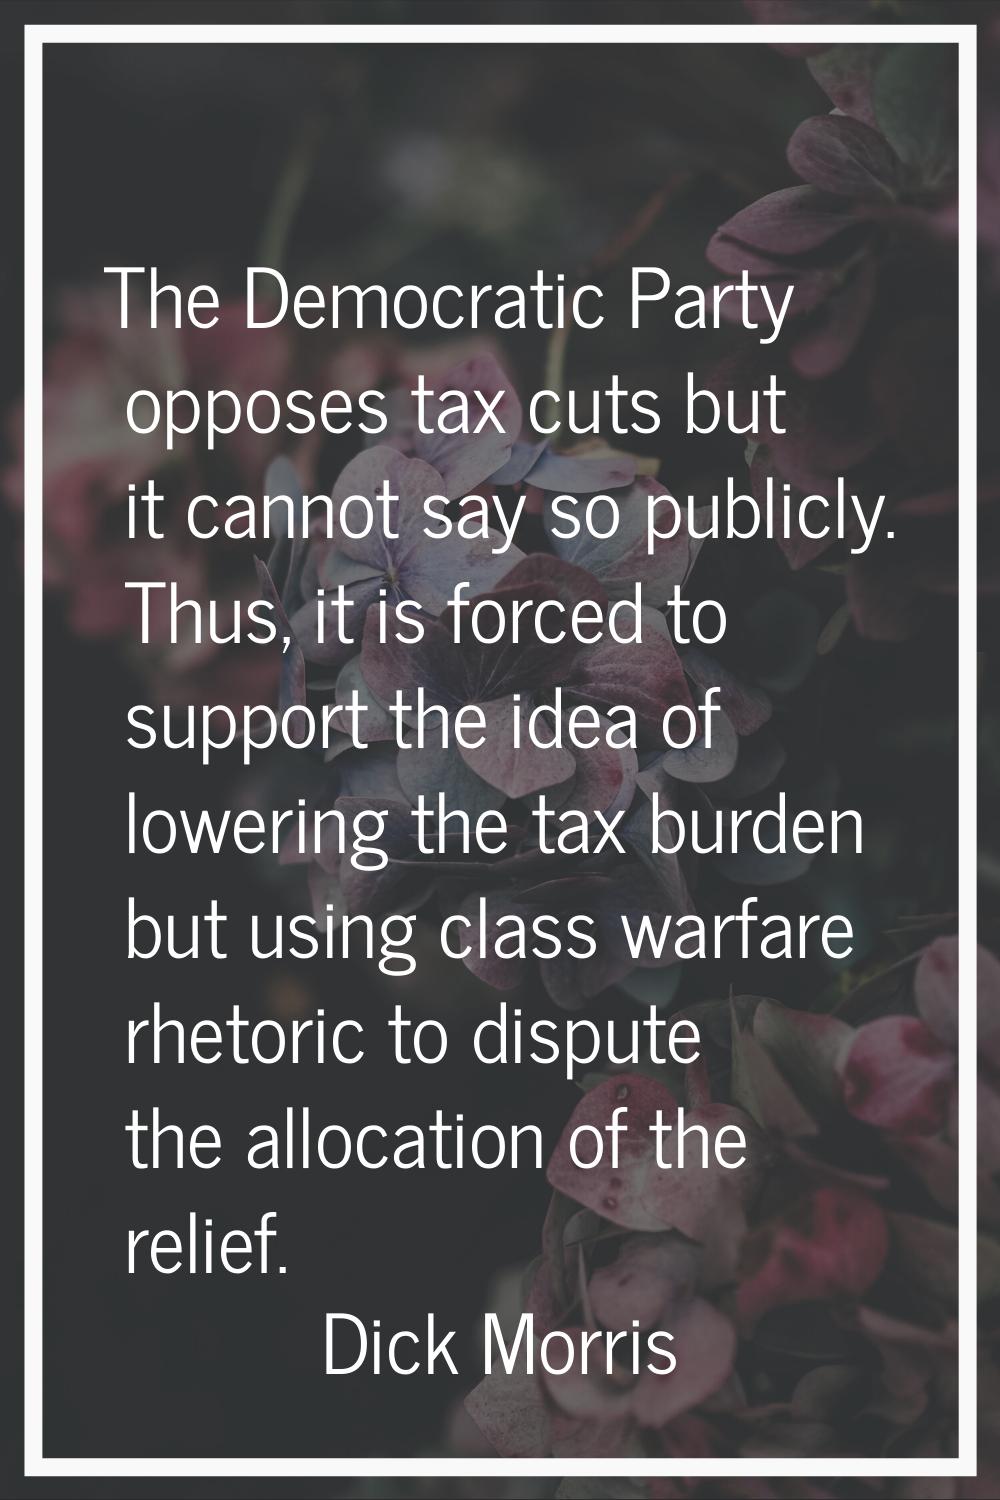 The Democratic Party opposes tax cuts but it cannot say so publicly. Thus, it is forced to support 